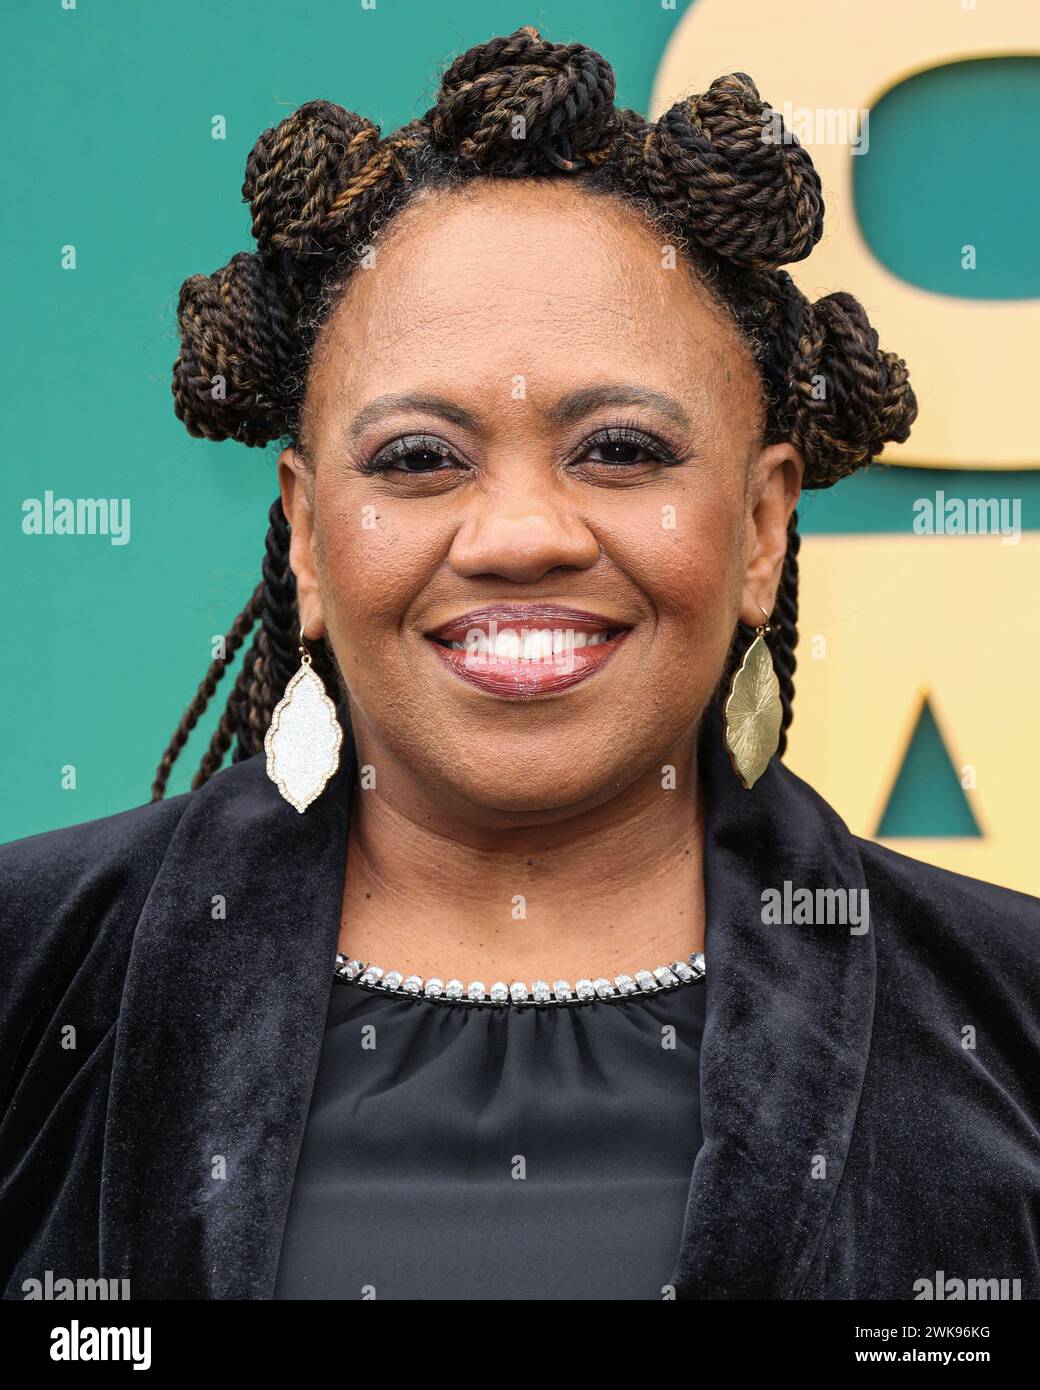 SANTA MONICA, LOS ANGELES, CALIFORNIA, USA - FEBRUARY 18: Chandra Wilson arrives at the 49th Annual People's Choice Awards 2024 held at The Barker Hangar on February 18, 2024 in Santa Monica, Los Angeles, California, United States. (Photo by Xavier Collin/Image Press Agency) Stock Photo